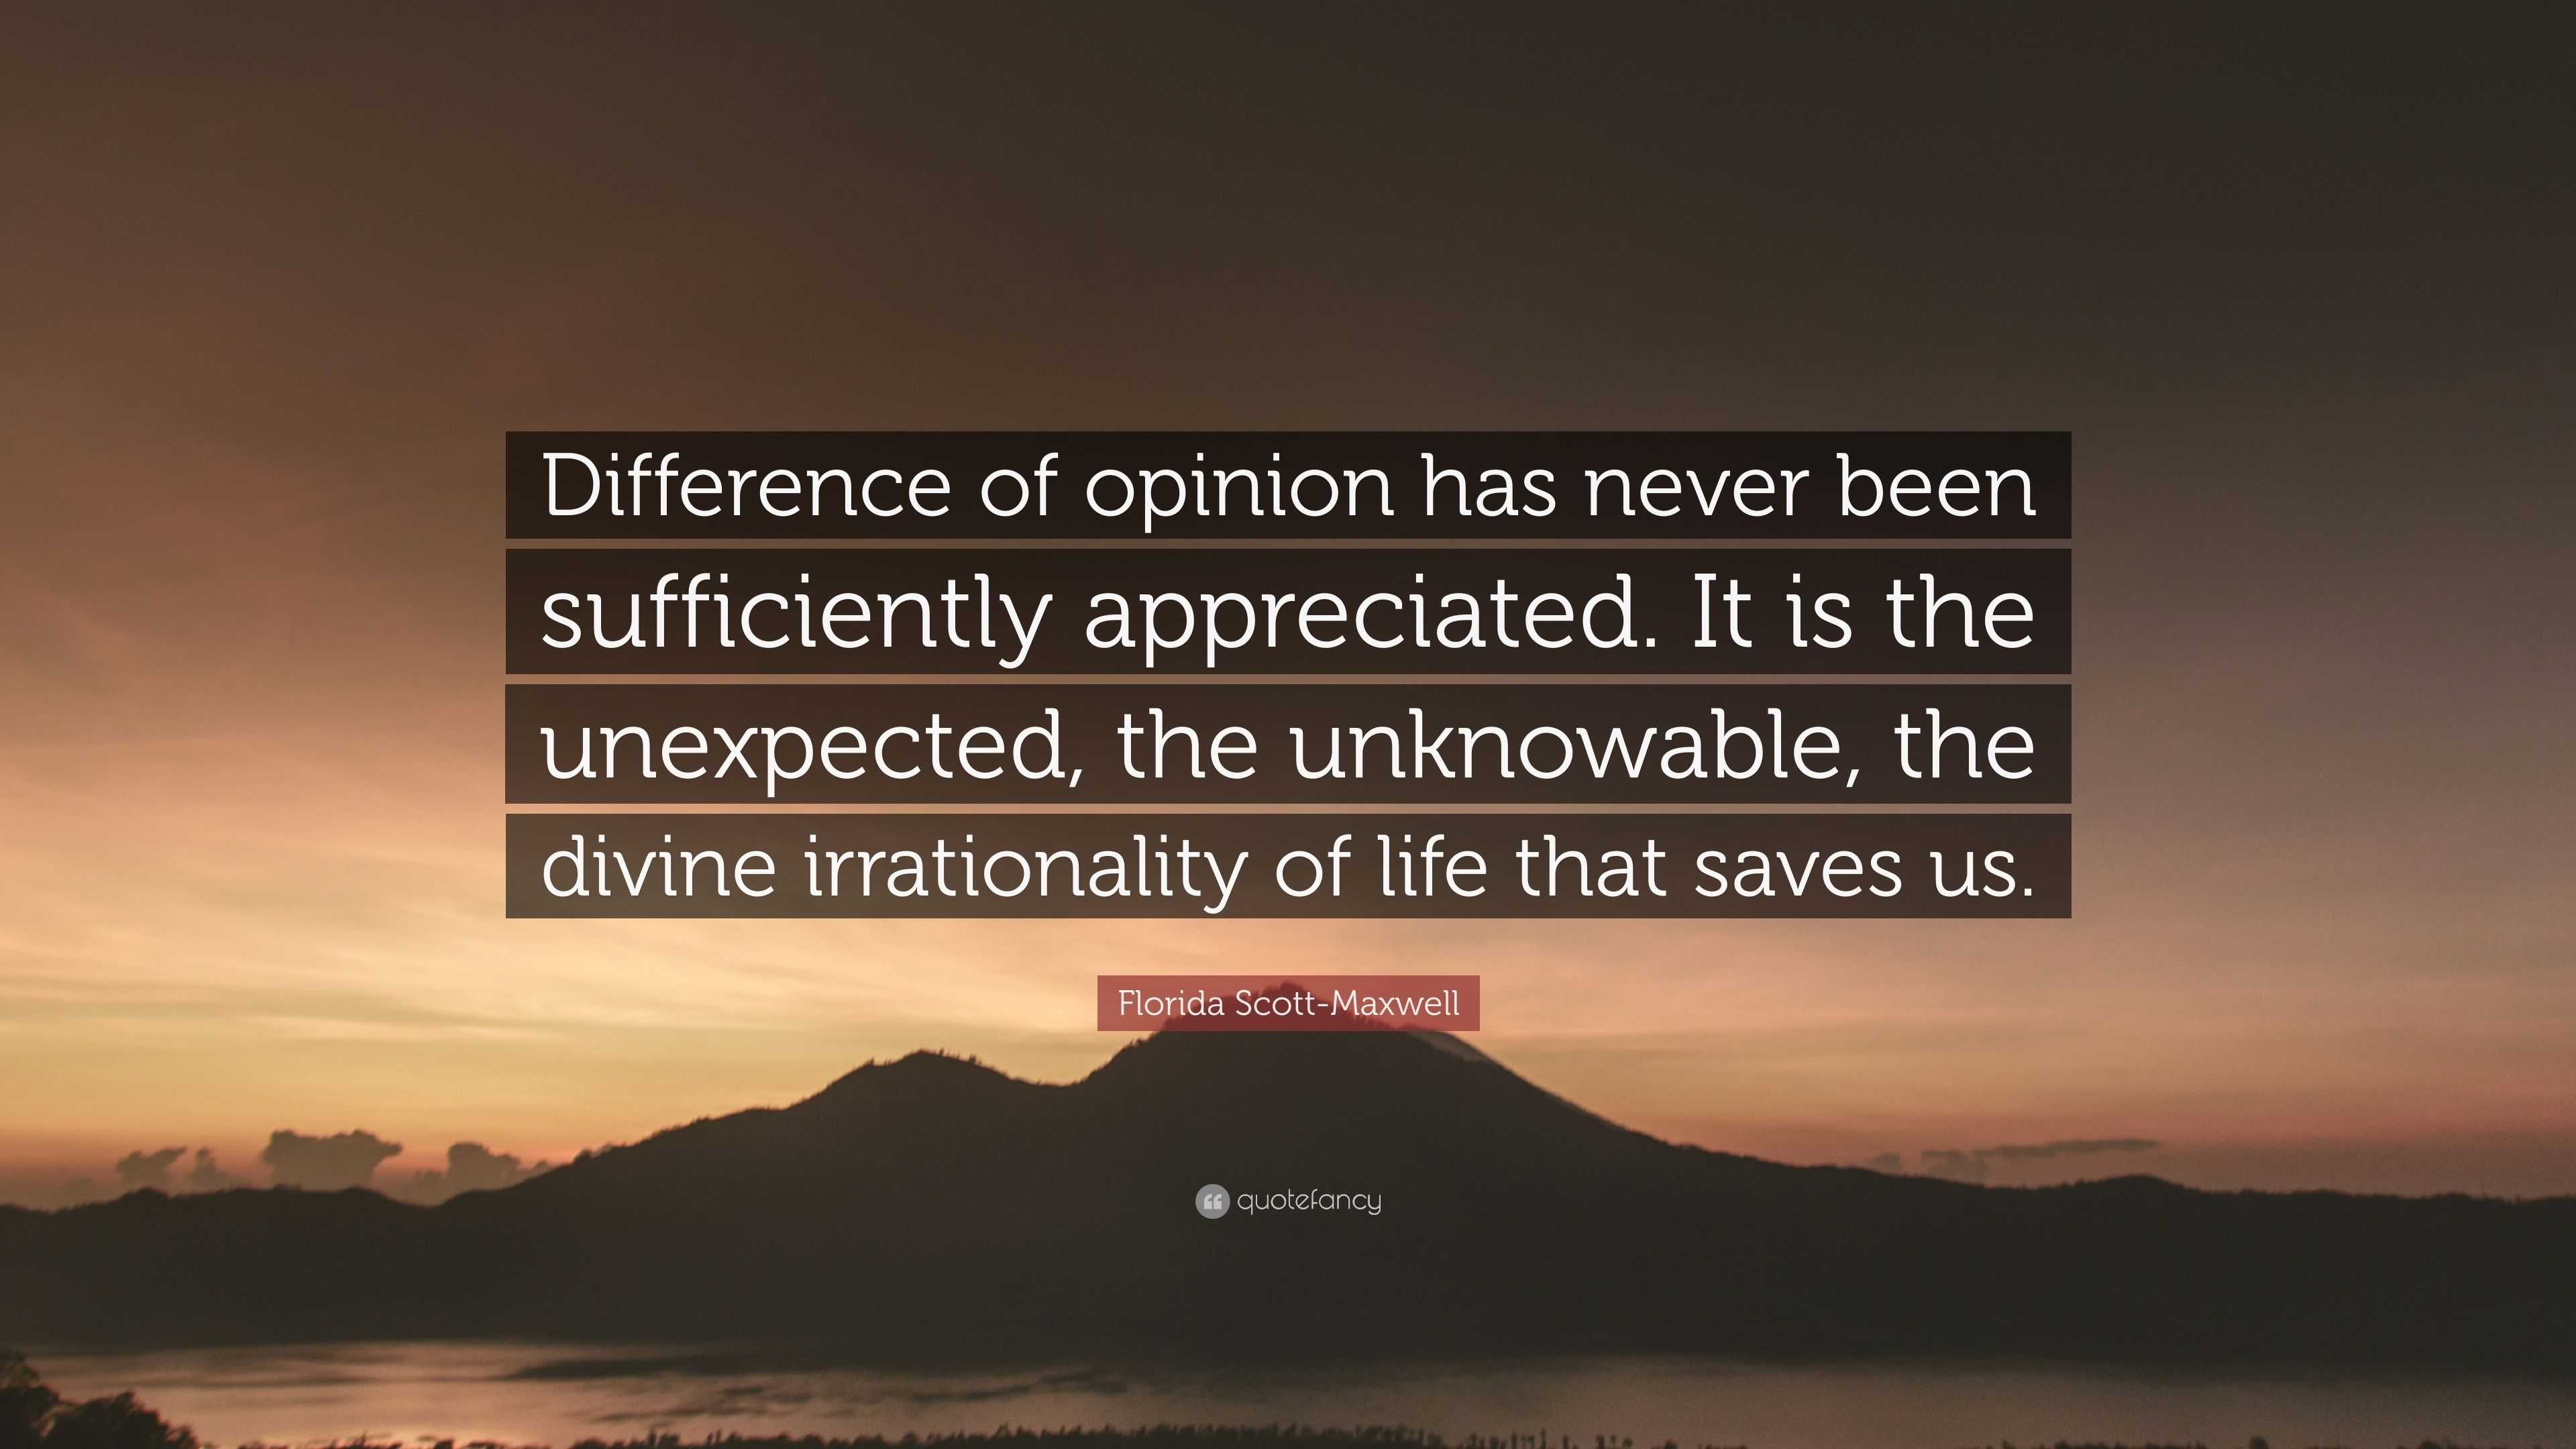 DIFFERENCE OF OPINION ® – Buy original DIFFERENCE OF OPINION